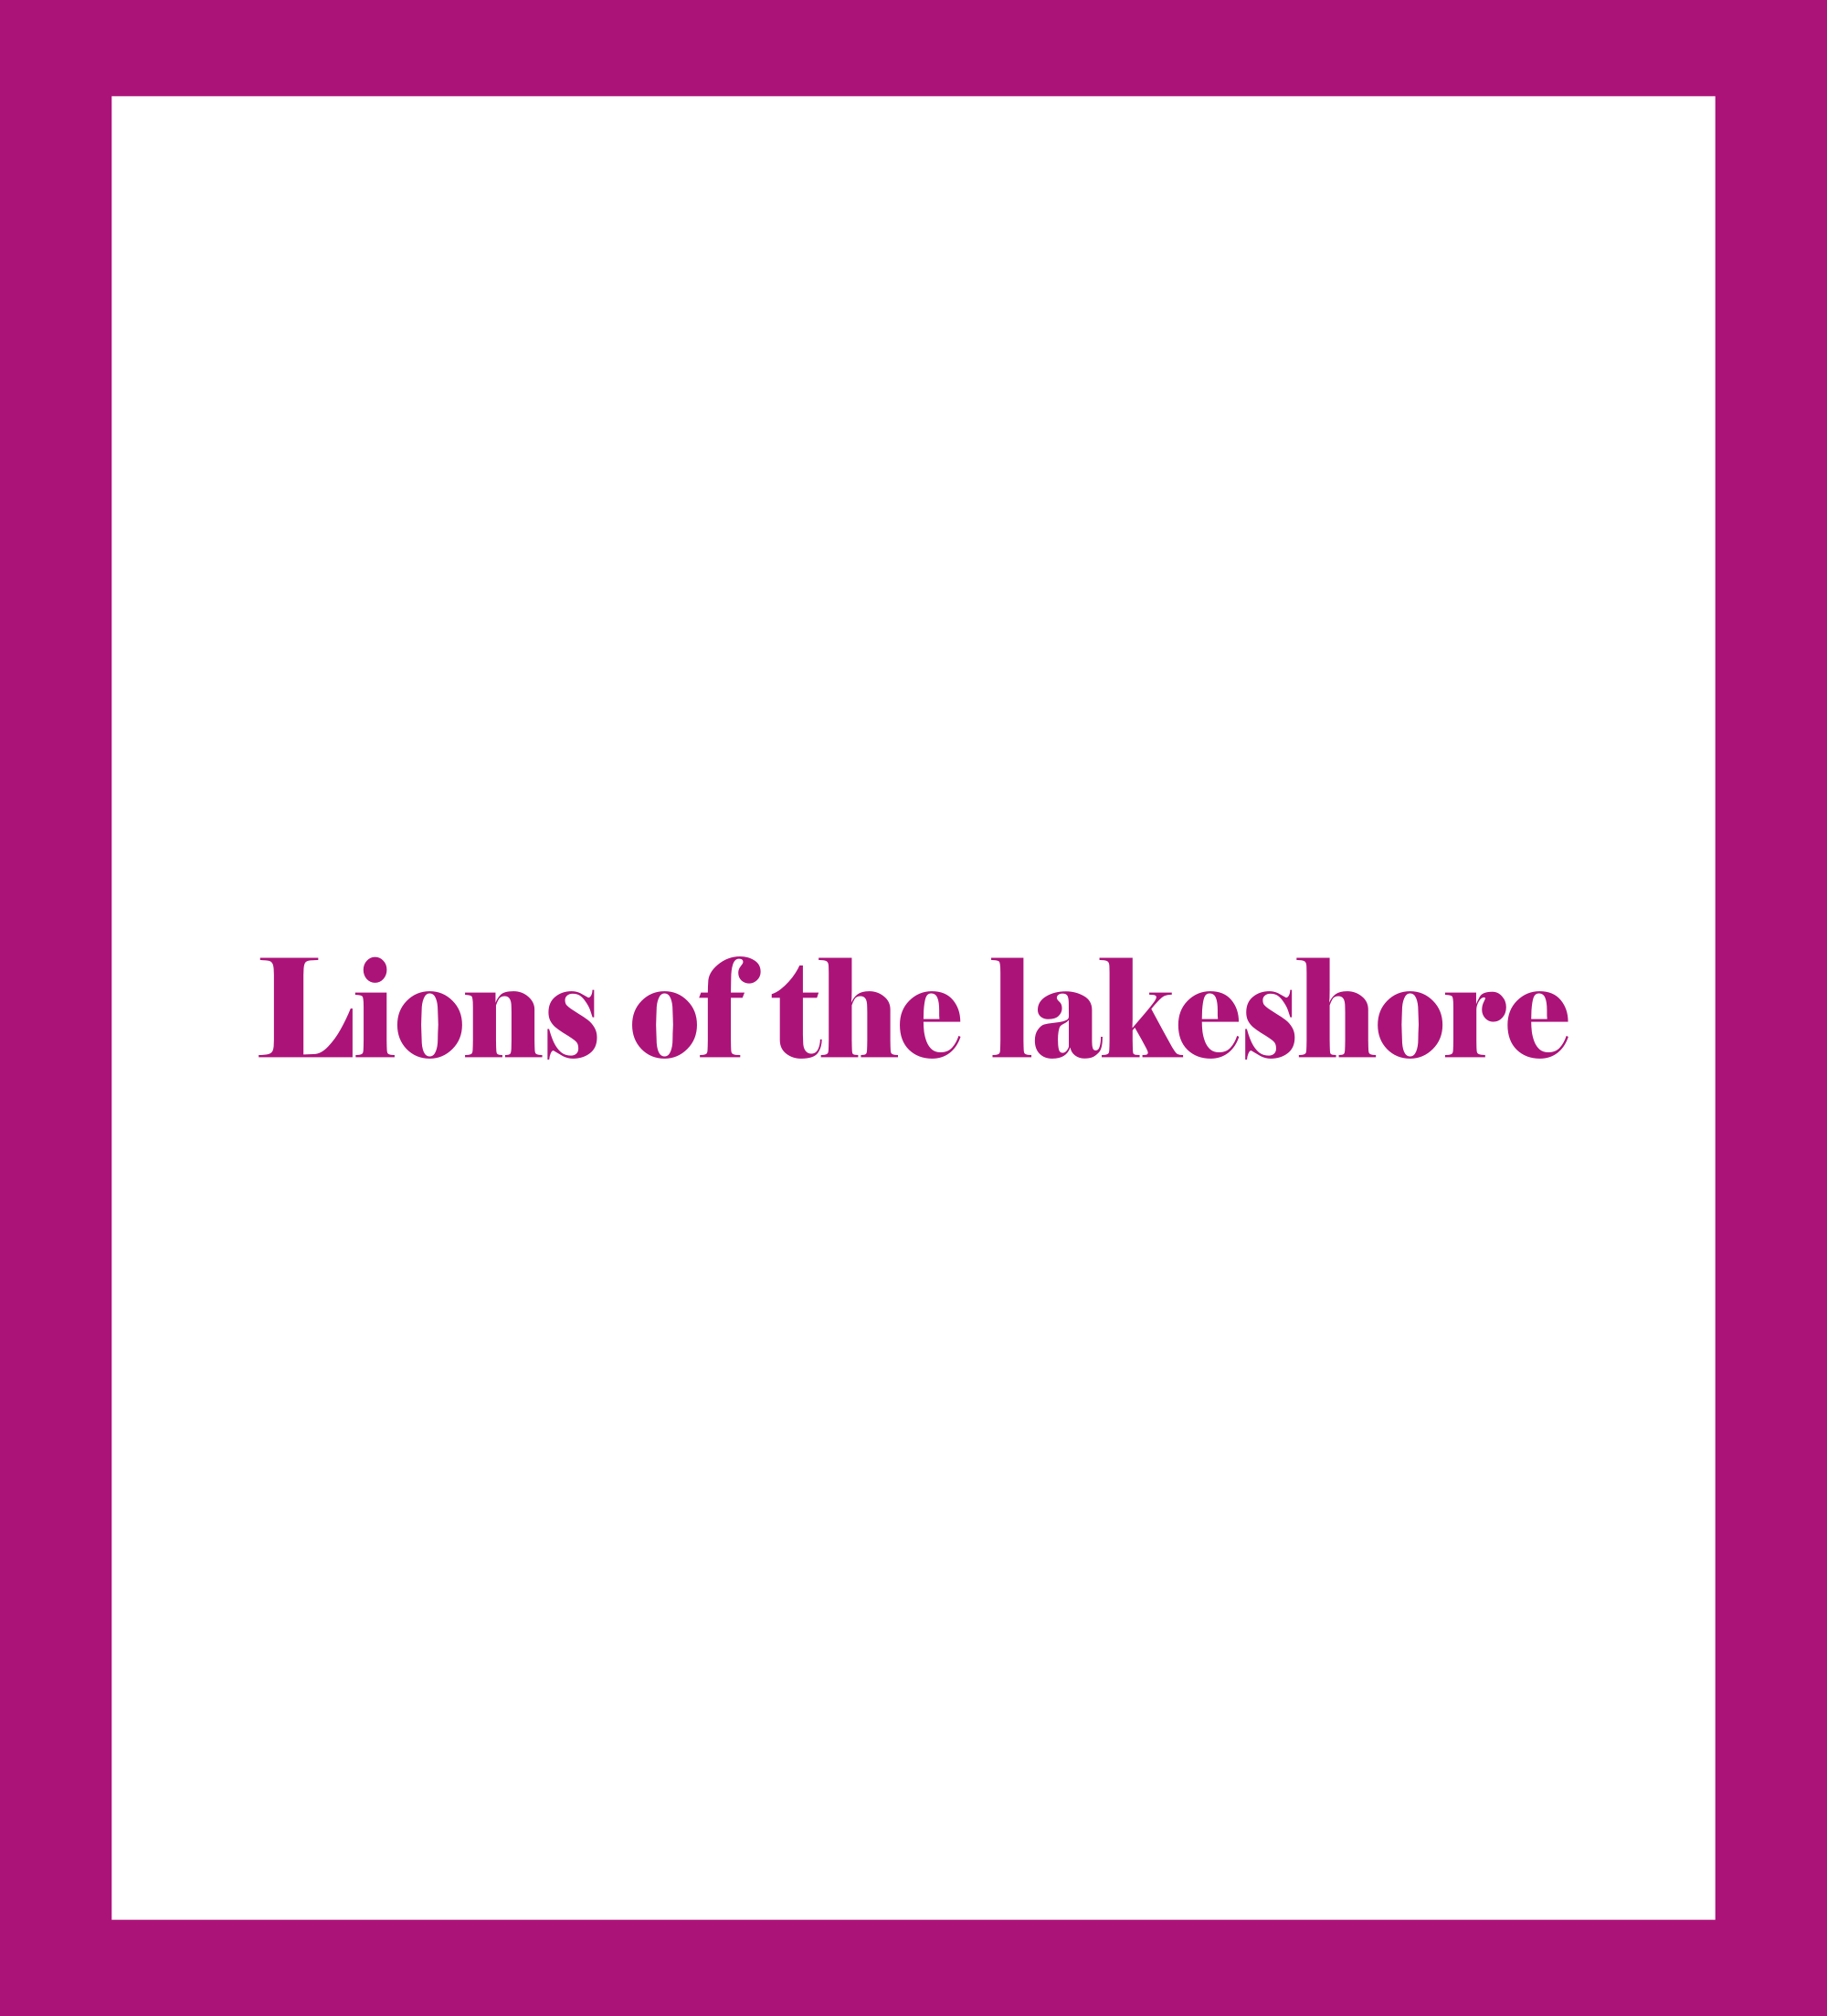 Lions of the lakeshore